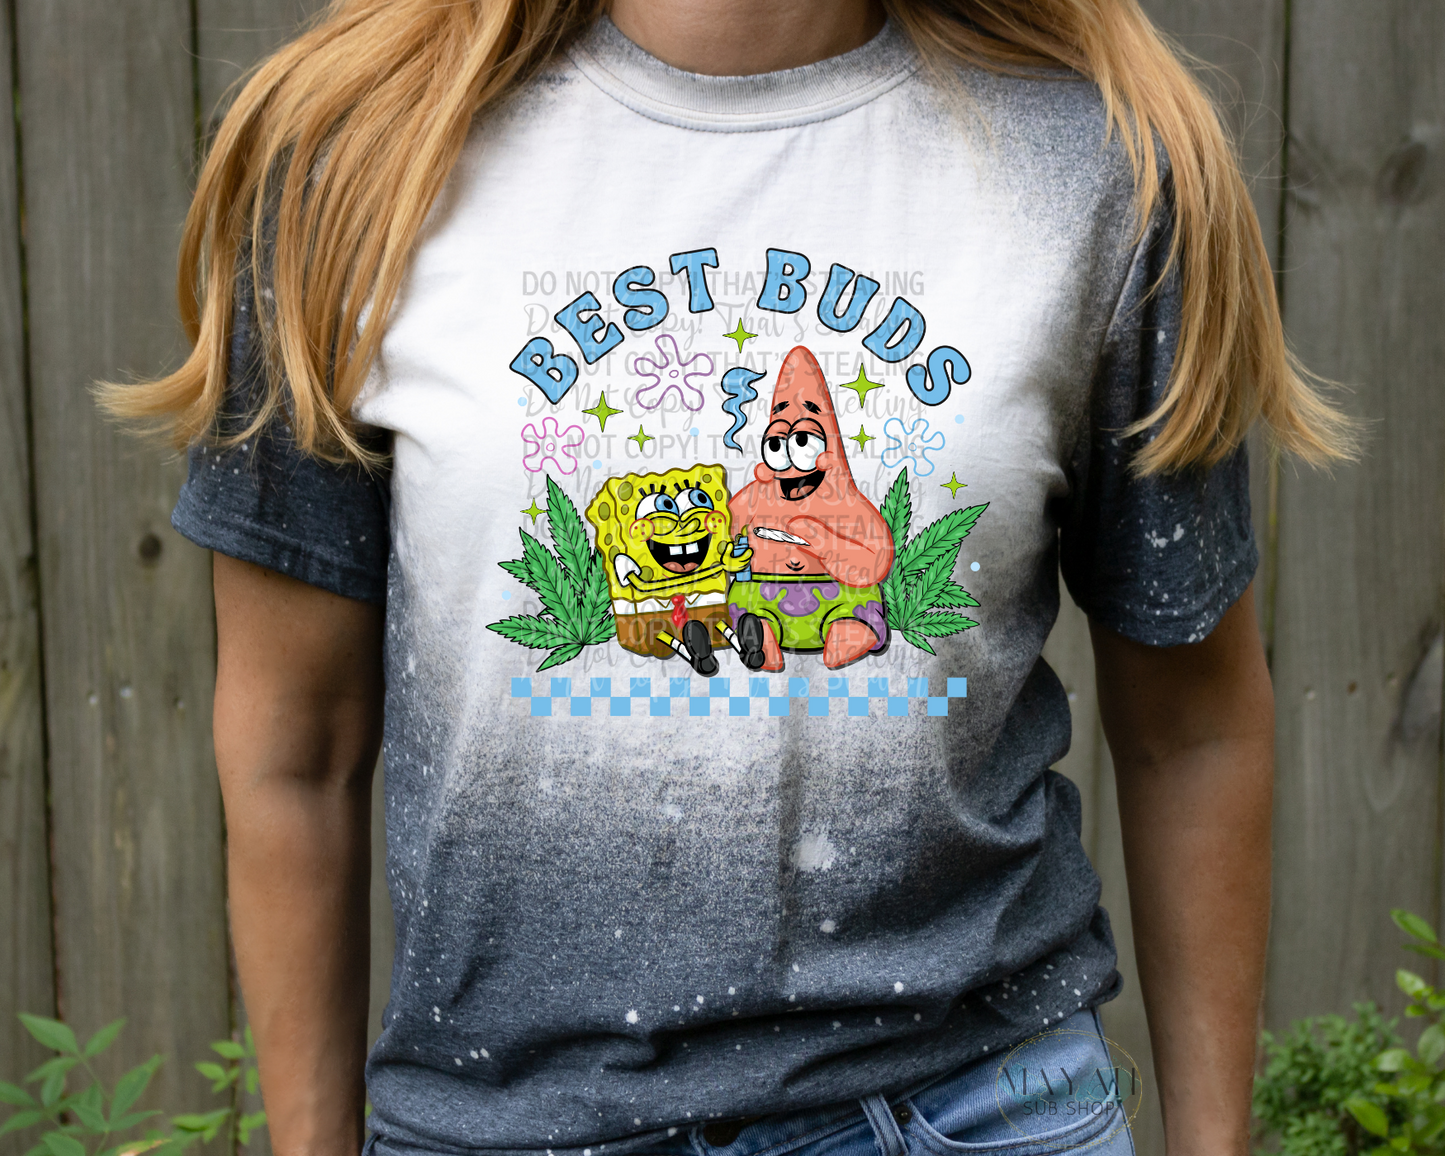 Best buds bleached tee. -Mayan Sub Shop